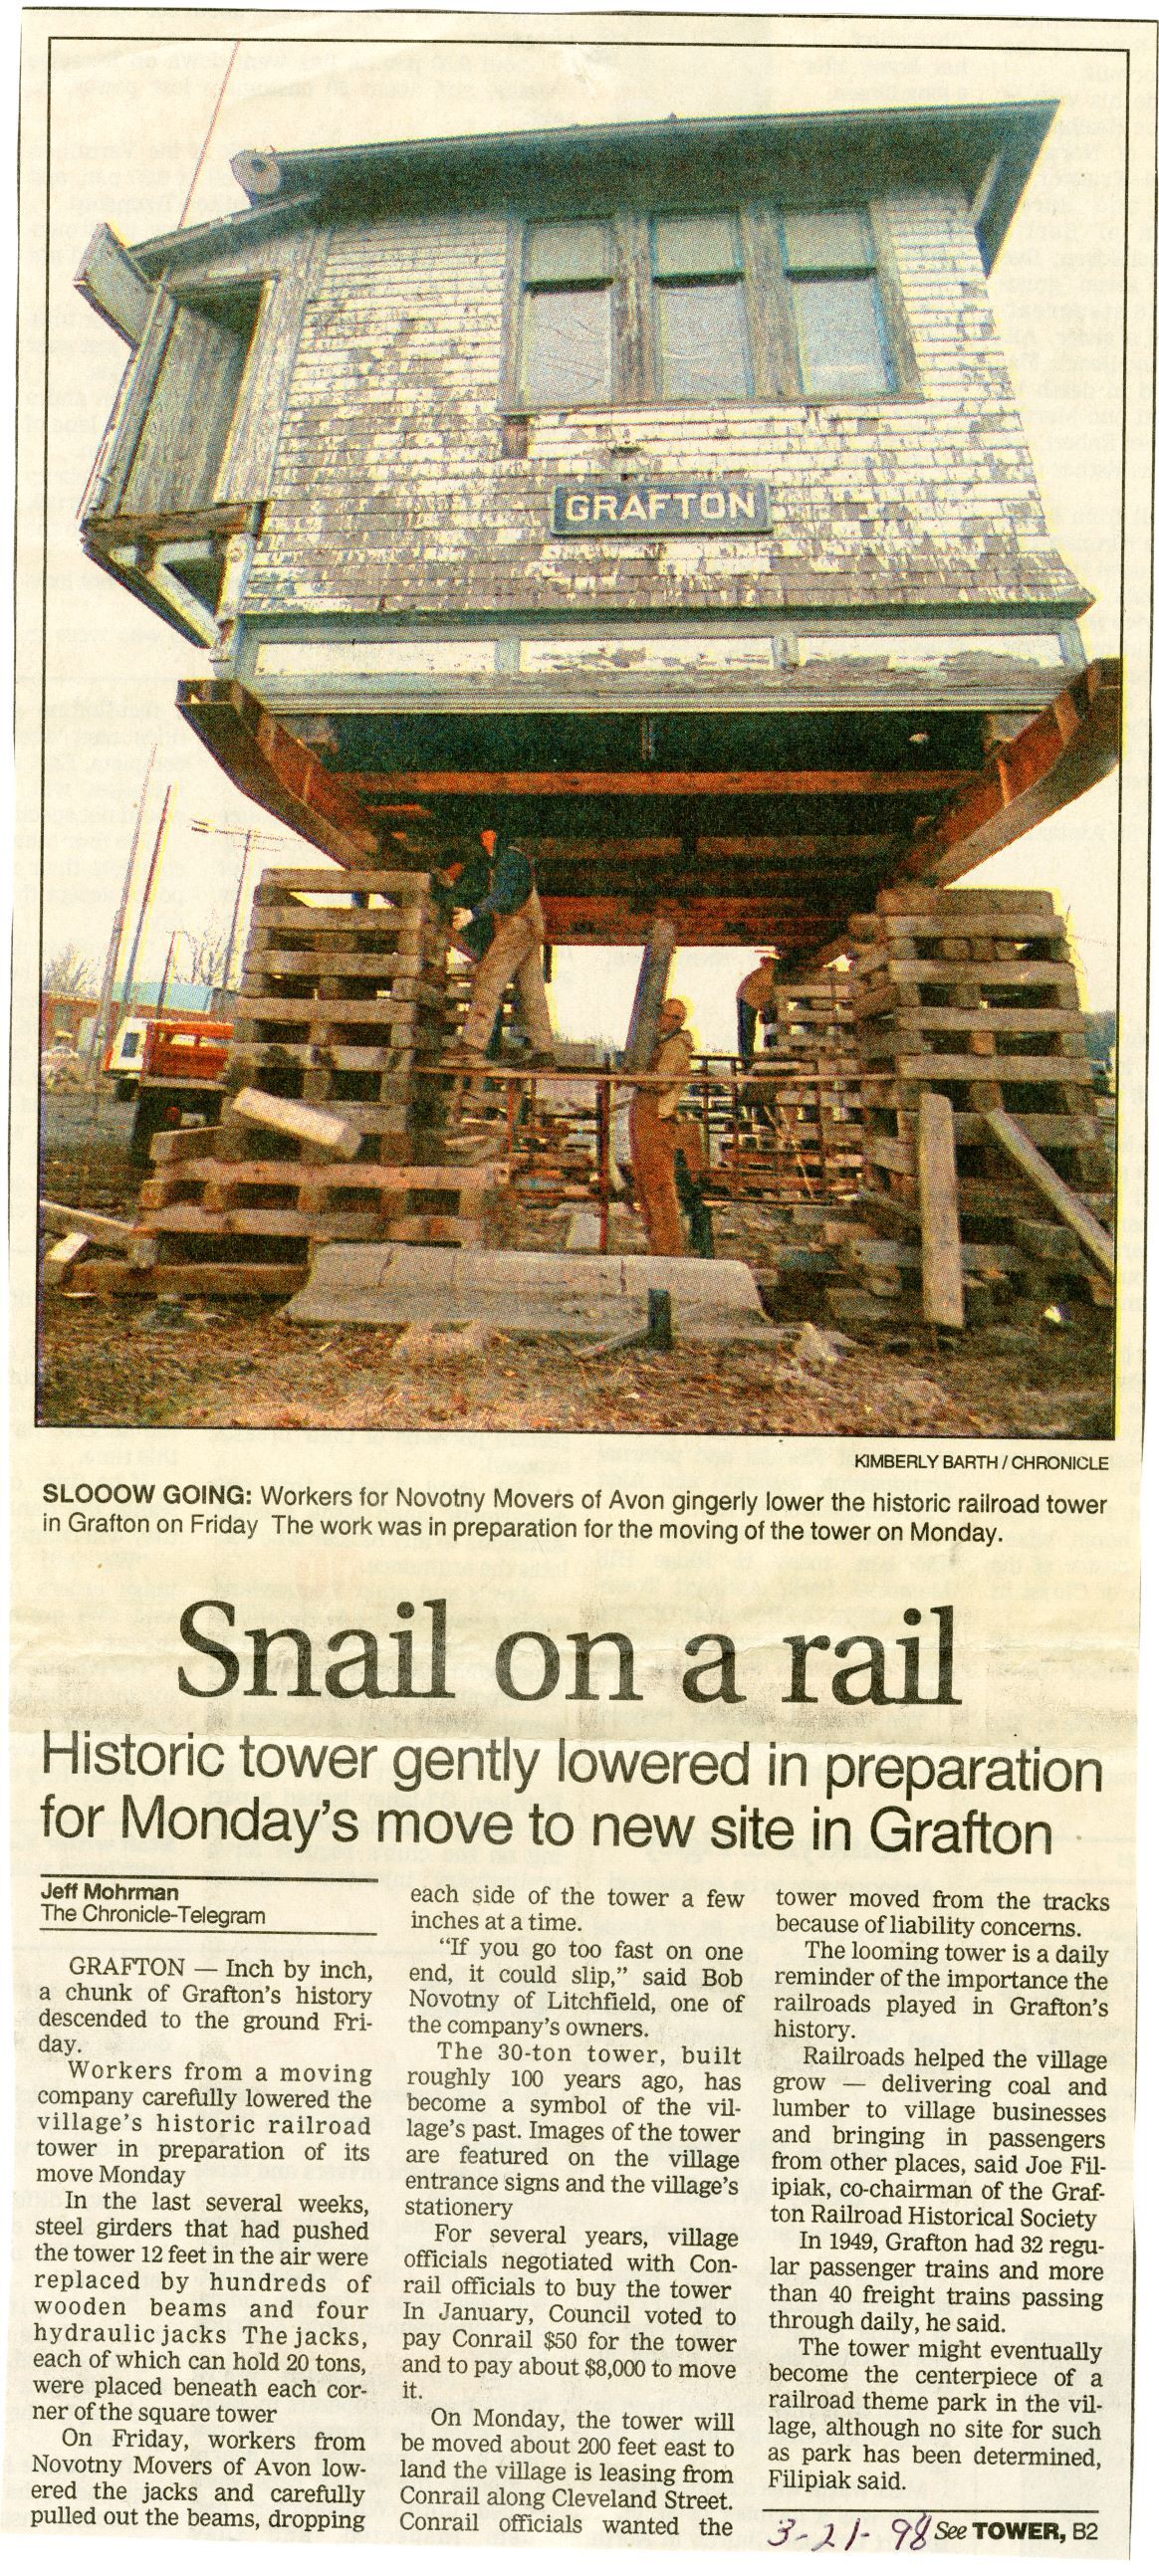 Article about the tower move 1998